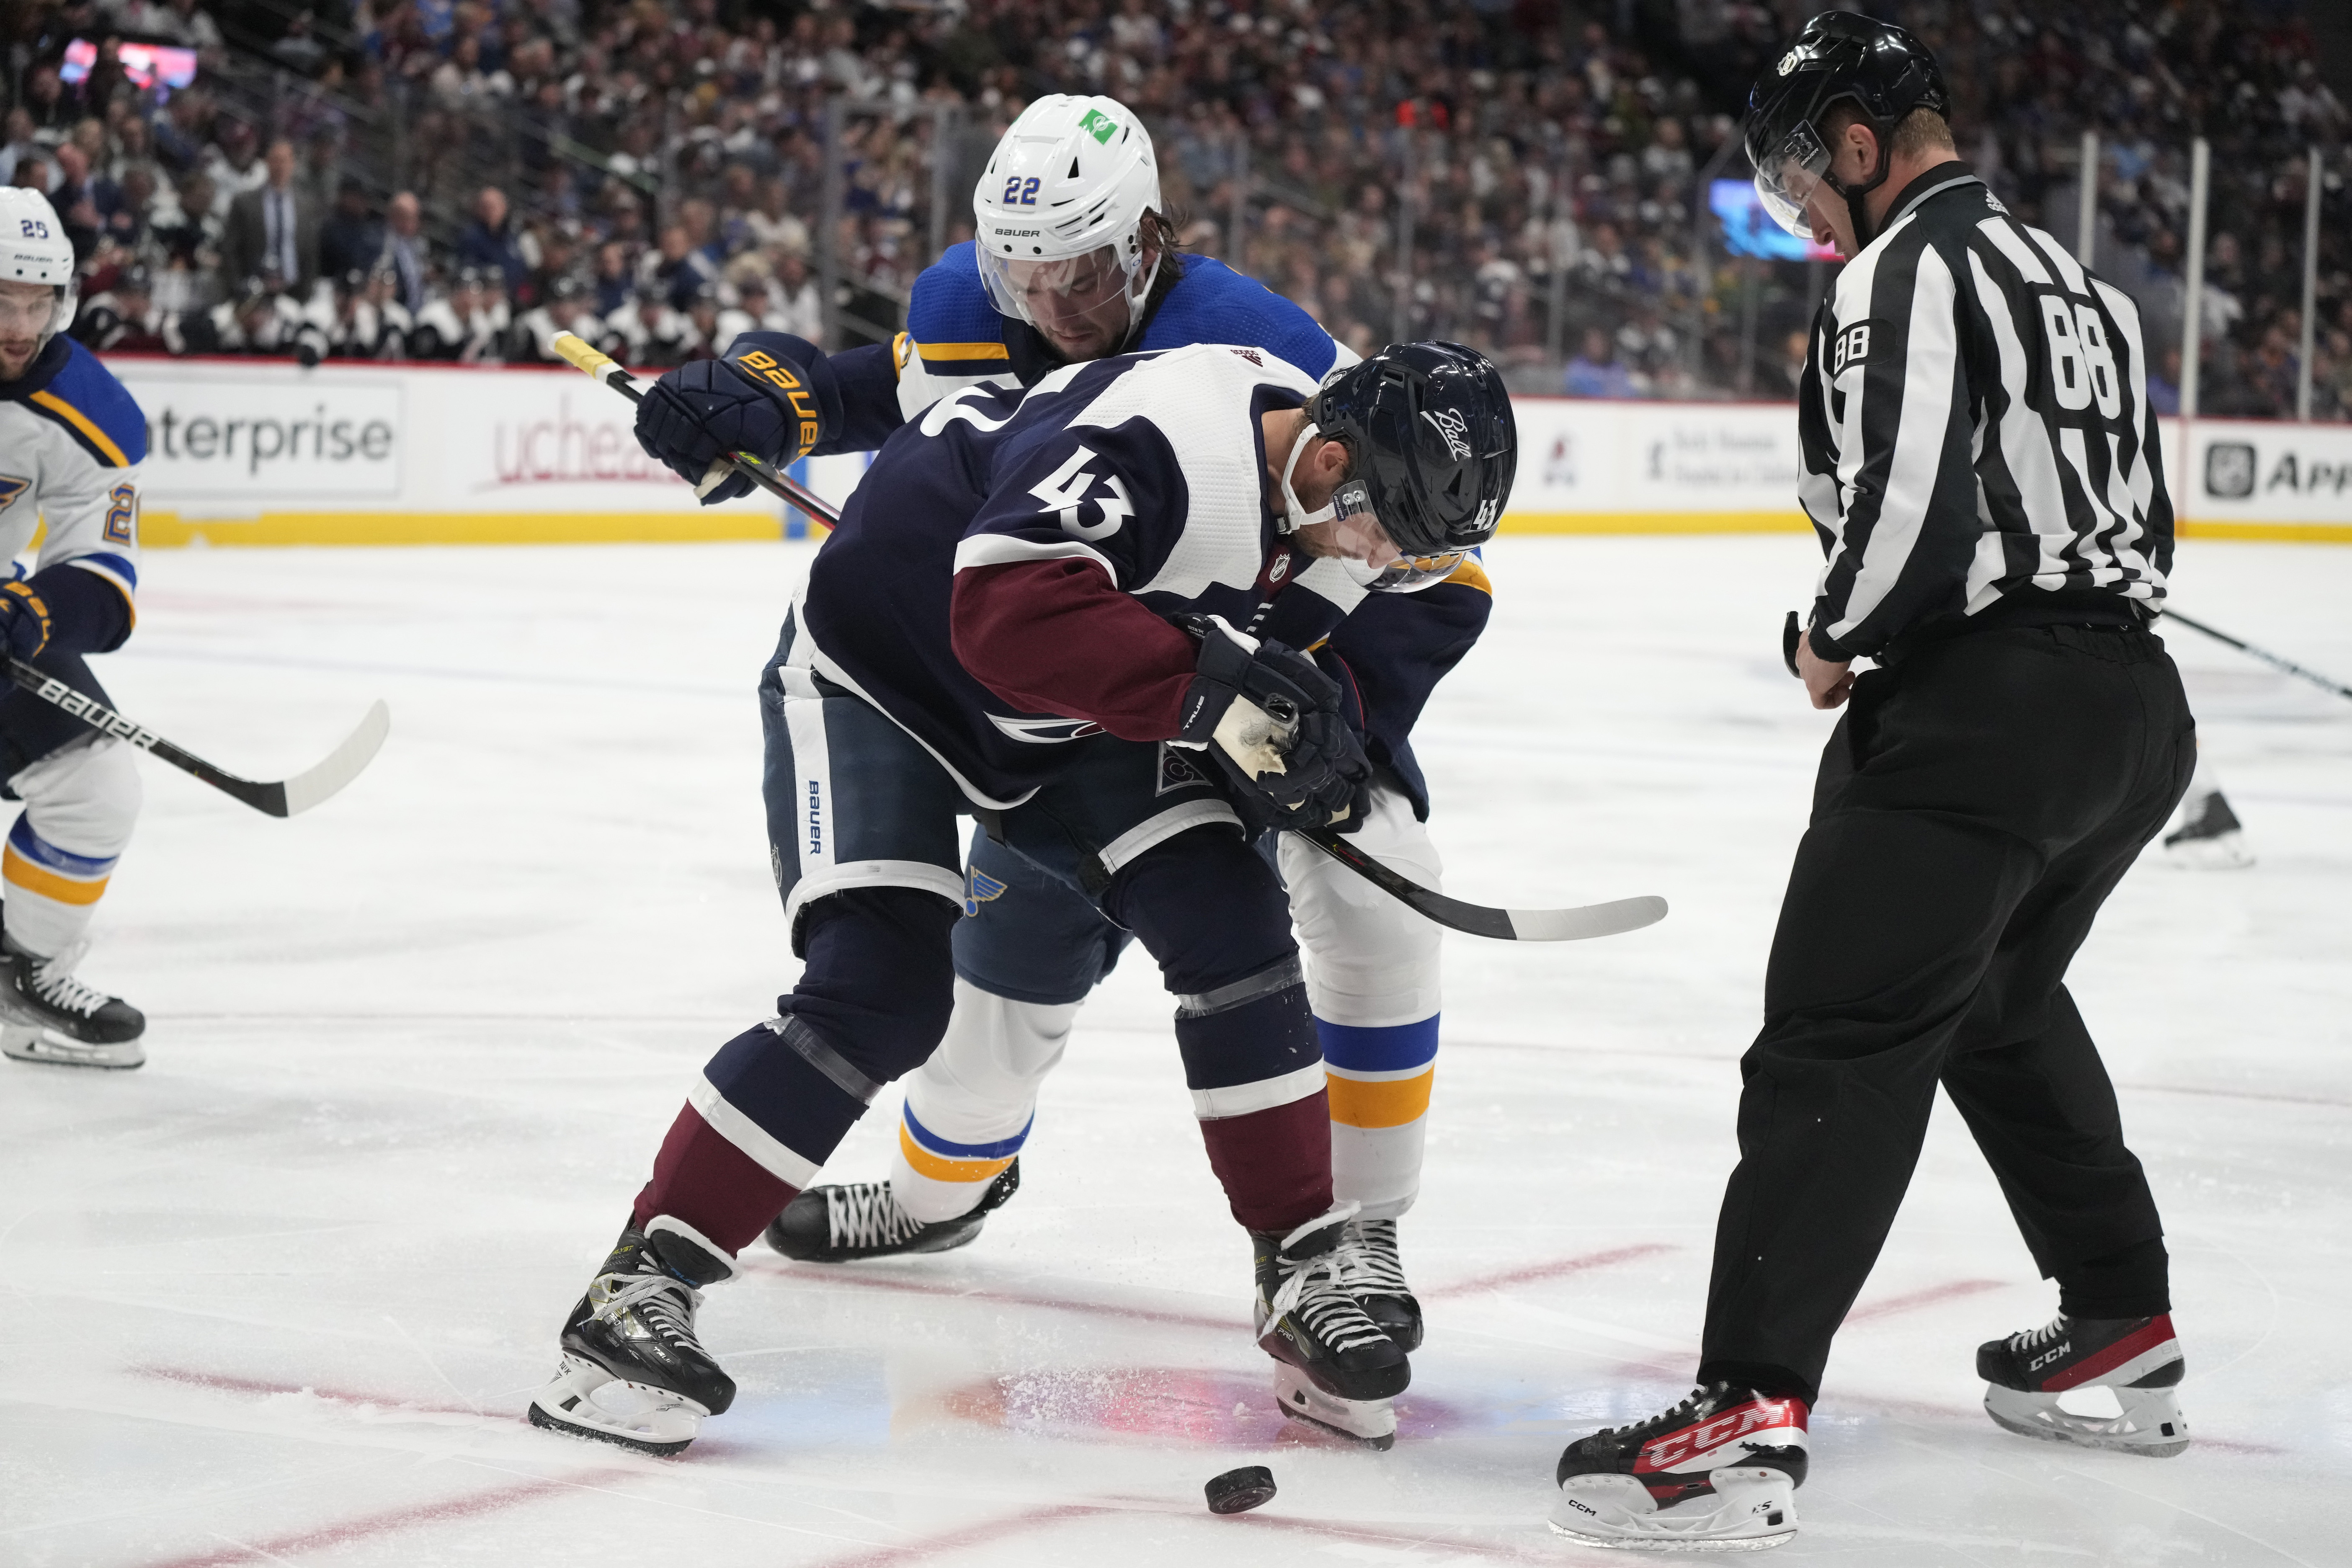 PHOTOS: Colorado Avalanche host the St. Louis Blues at Ball Arena